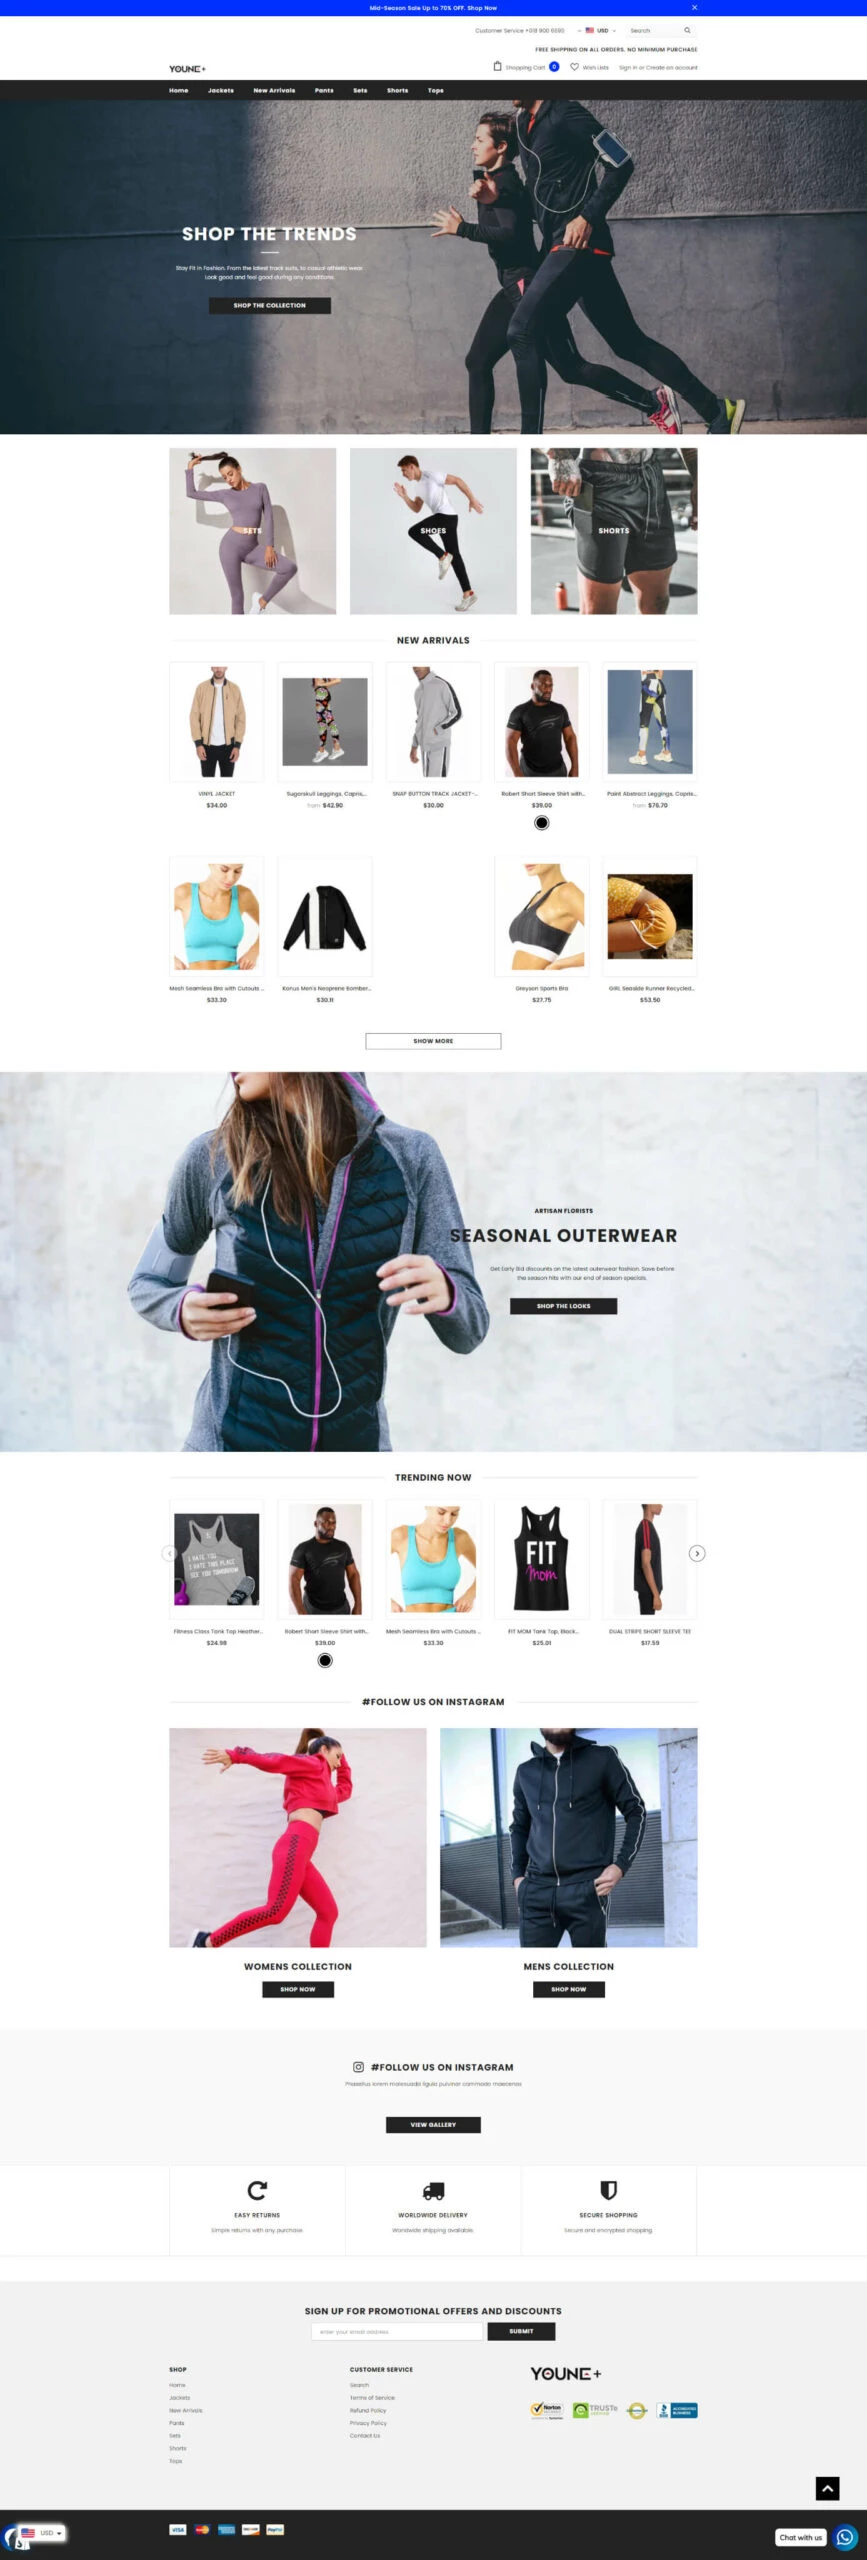 screencapture-dropship-sprout-activewear1-myshopify-2021-09-19-17_49_35-scaled.jpgw3